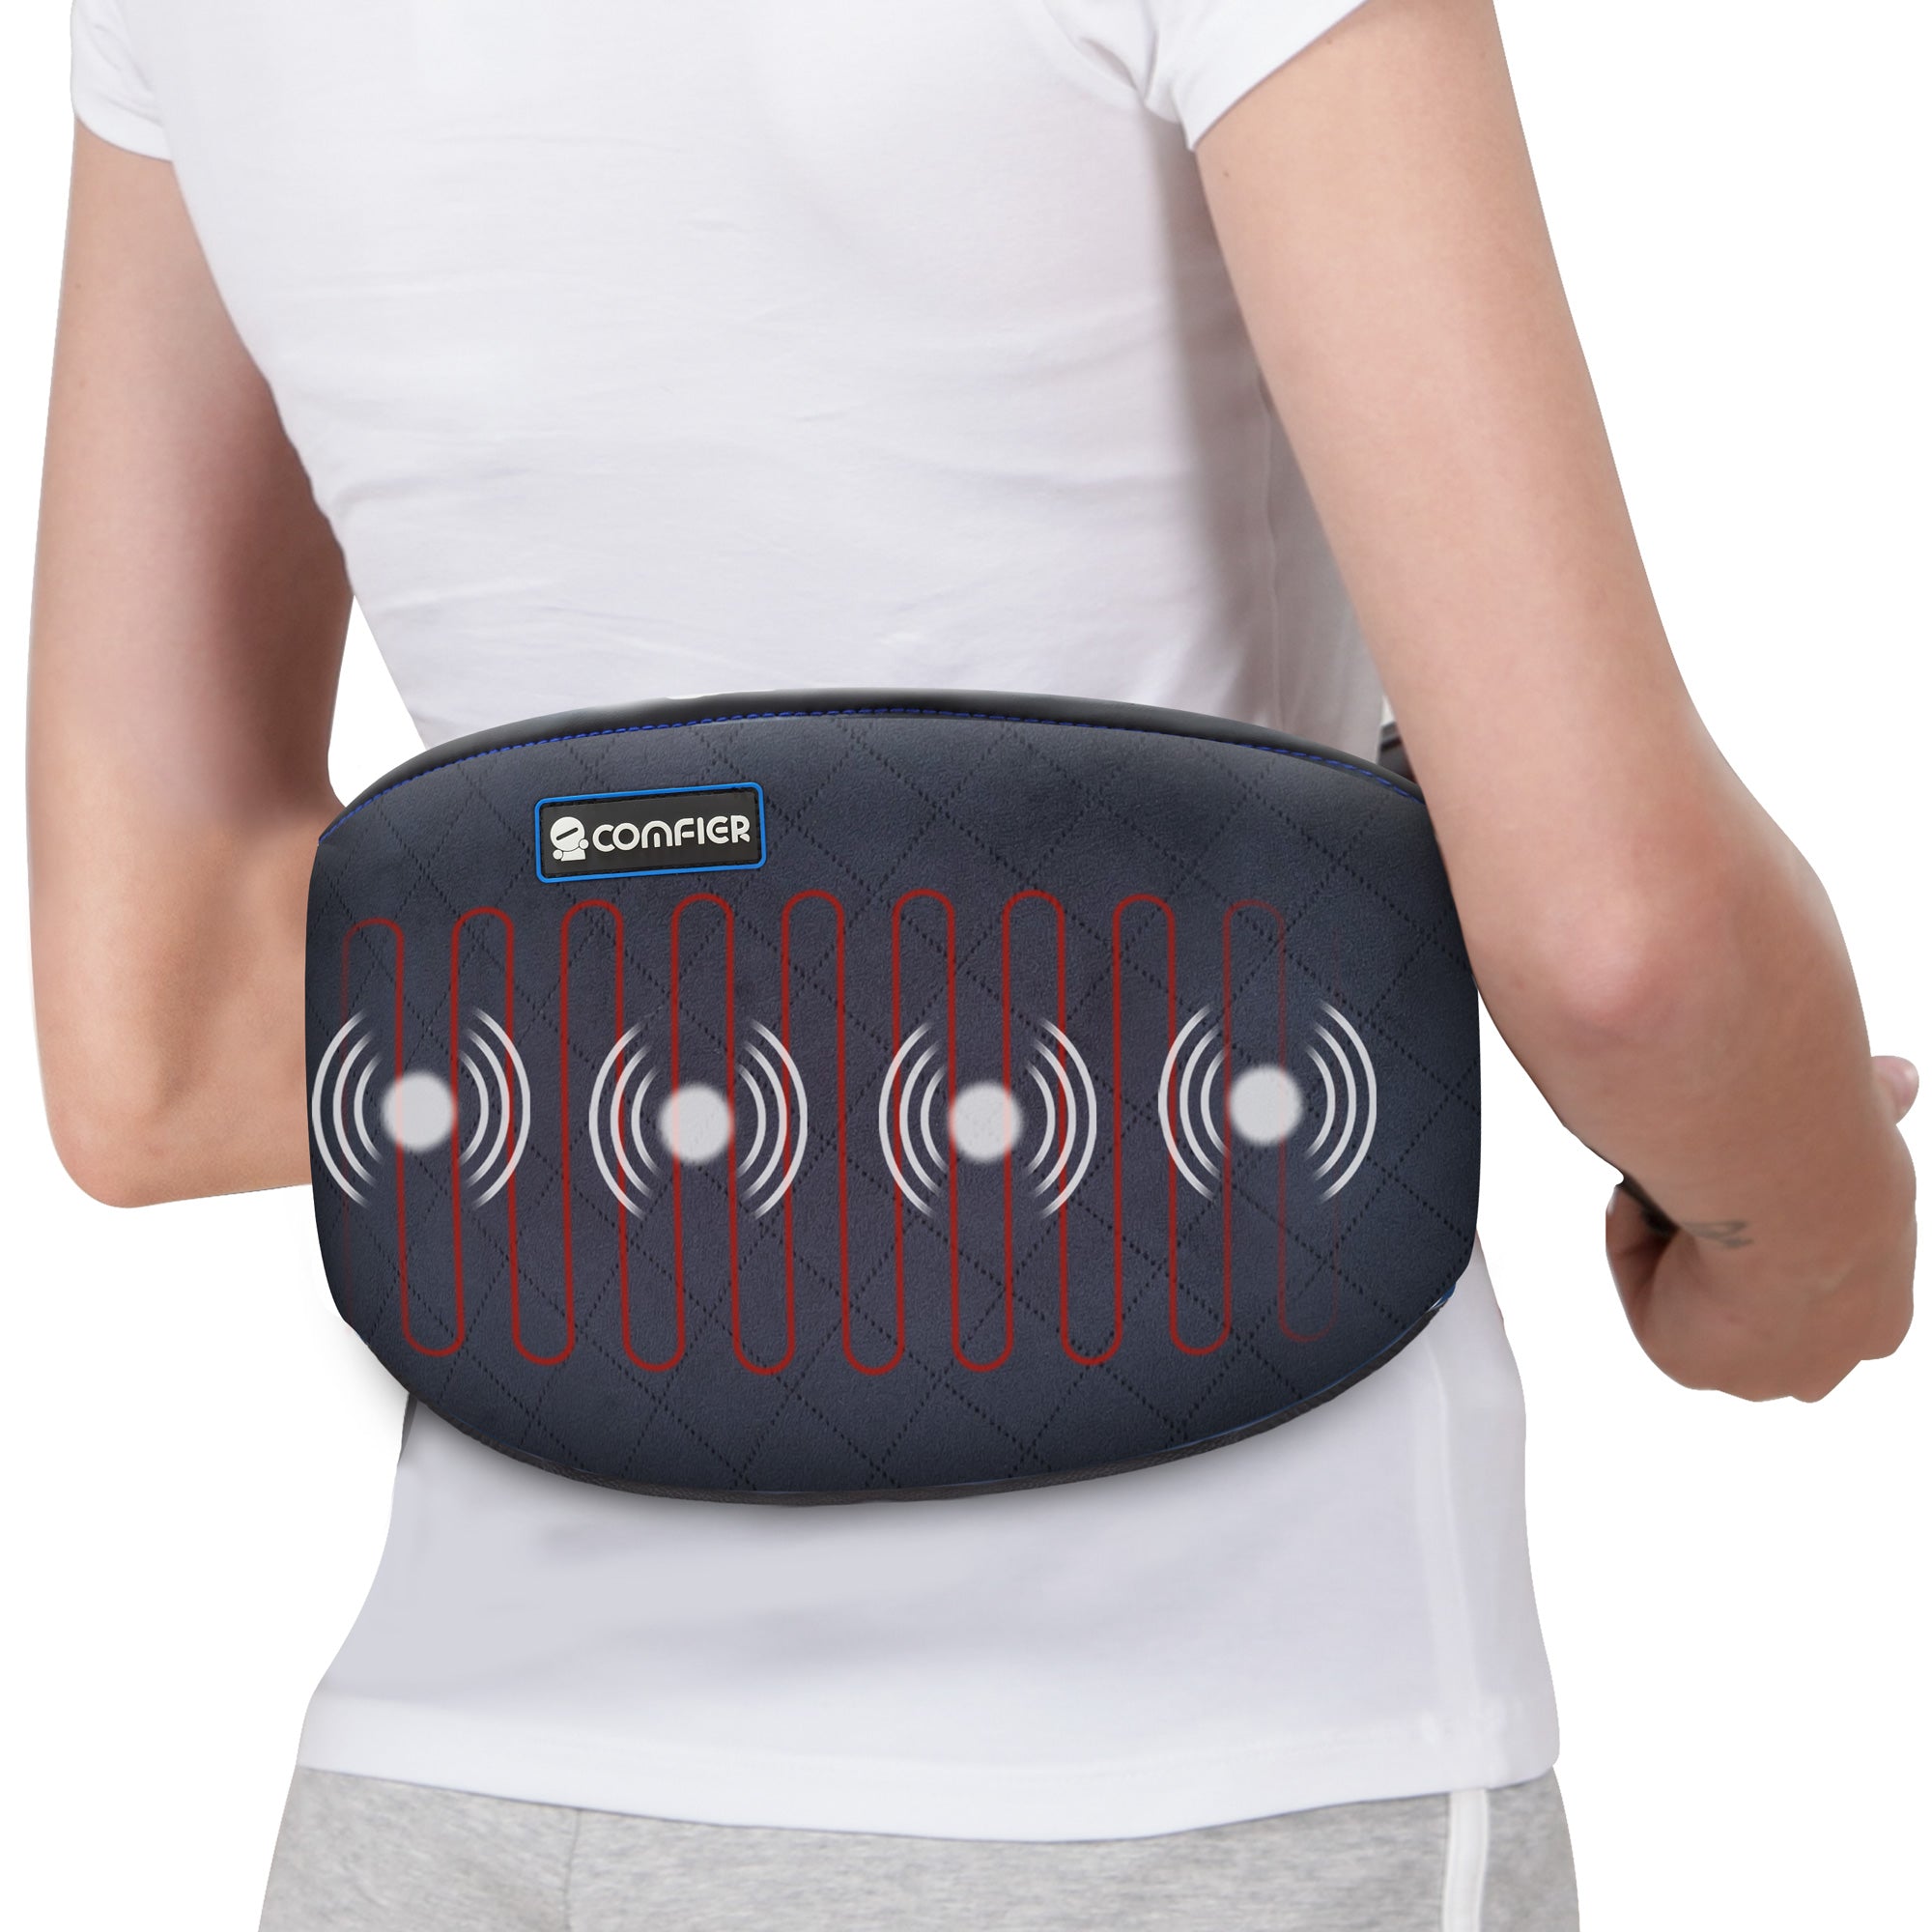 Comfier Heating Pad for Back Pain - Heat Belly Wrap Belt with Vibratio